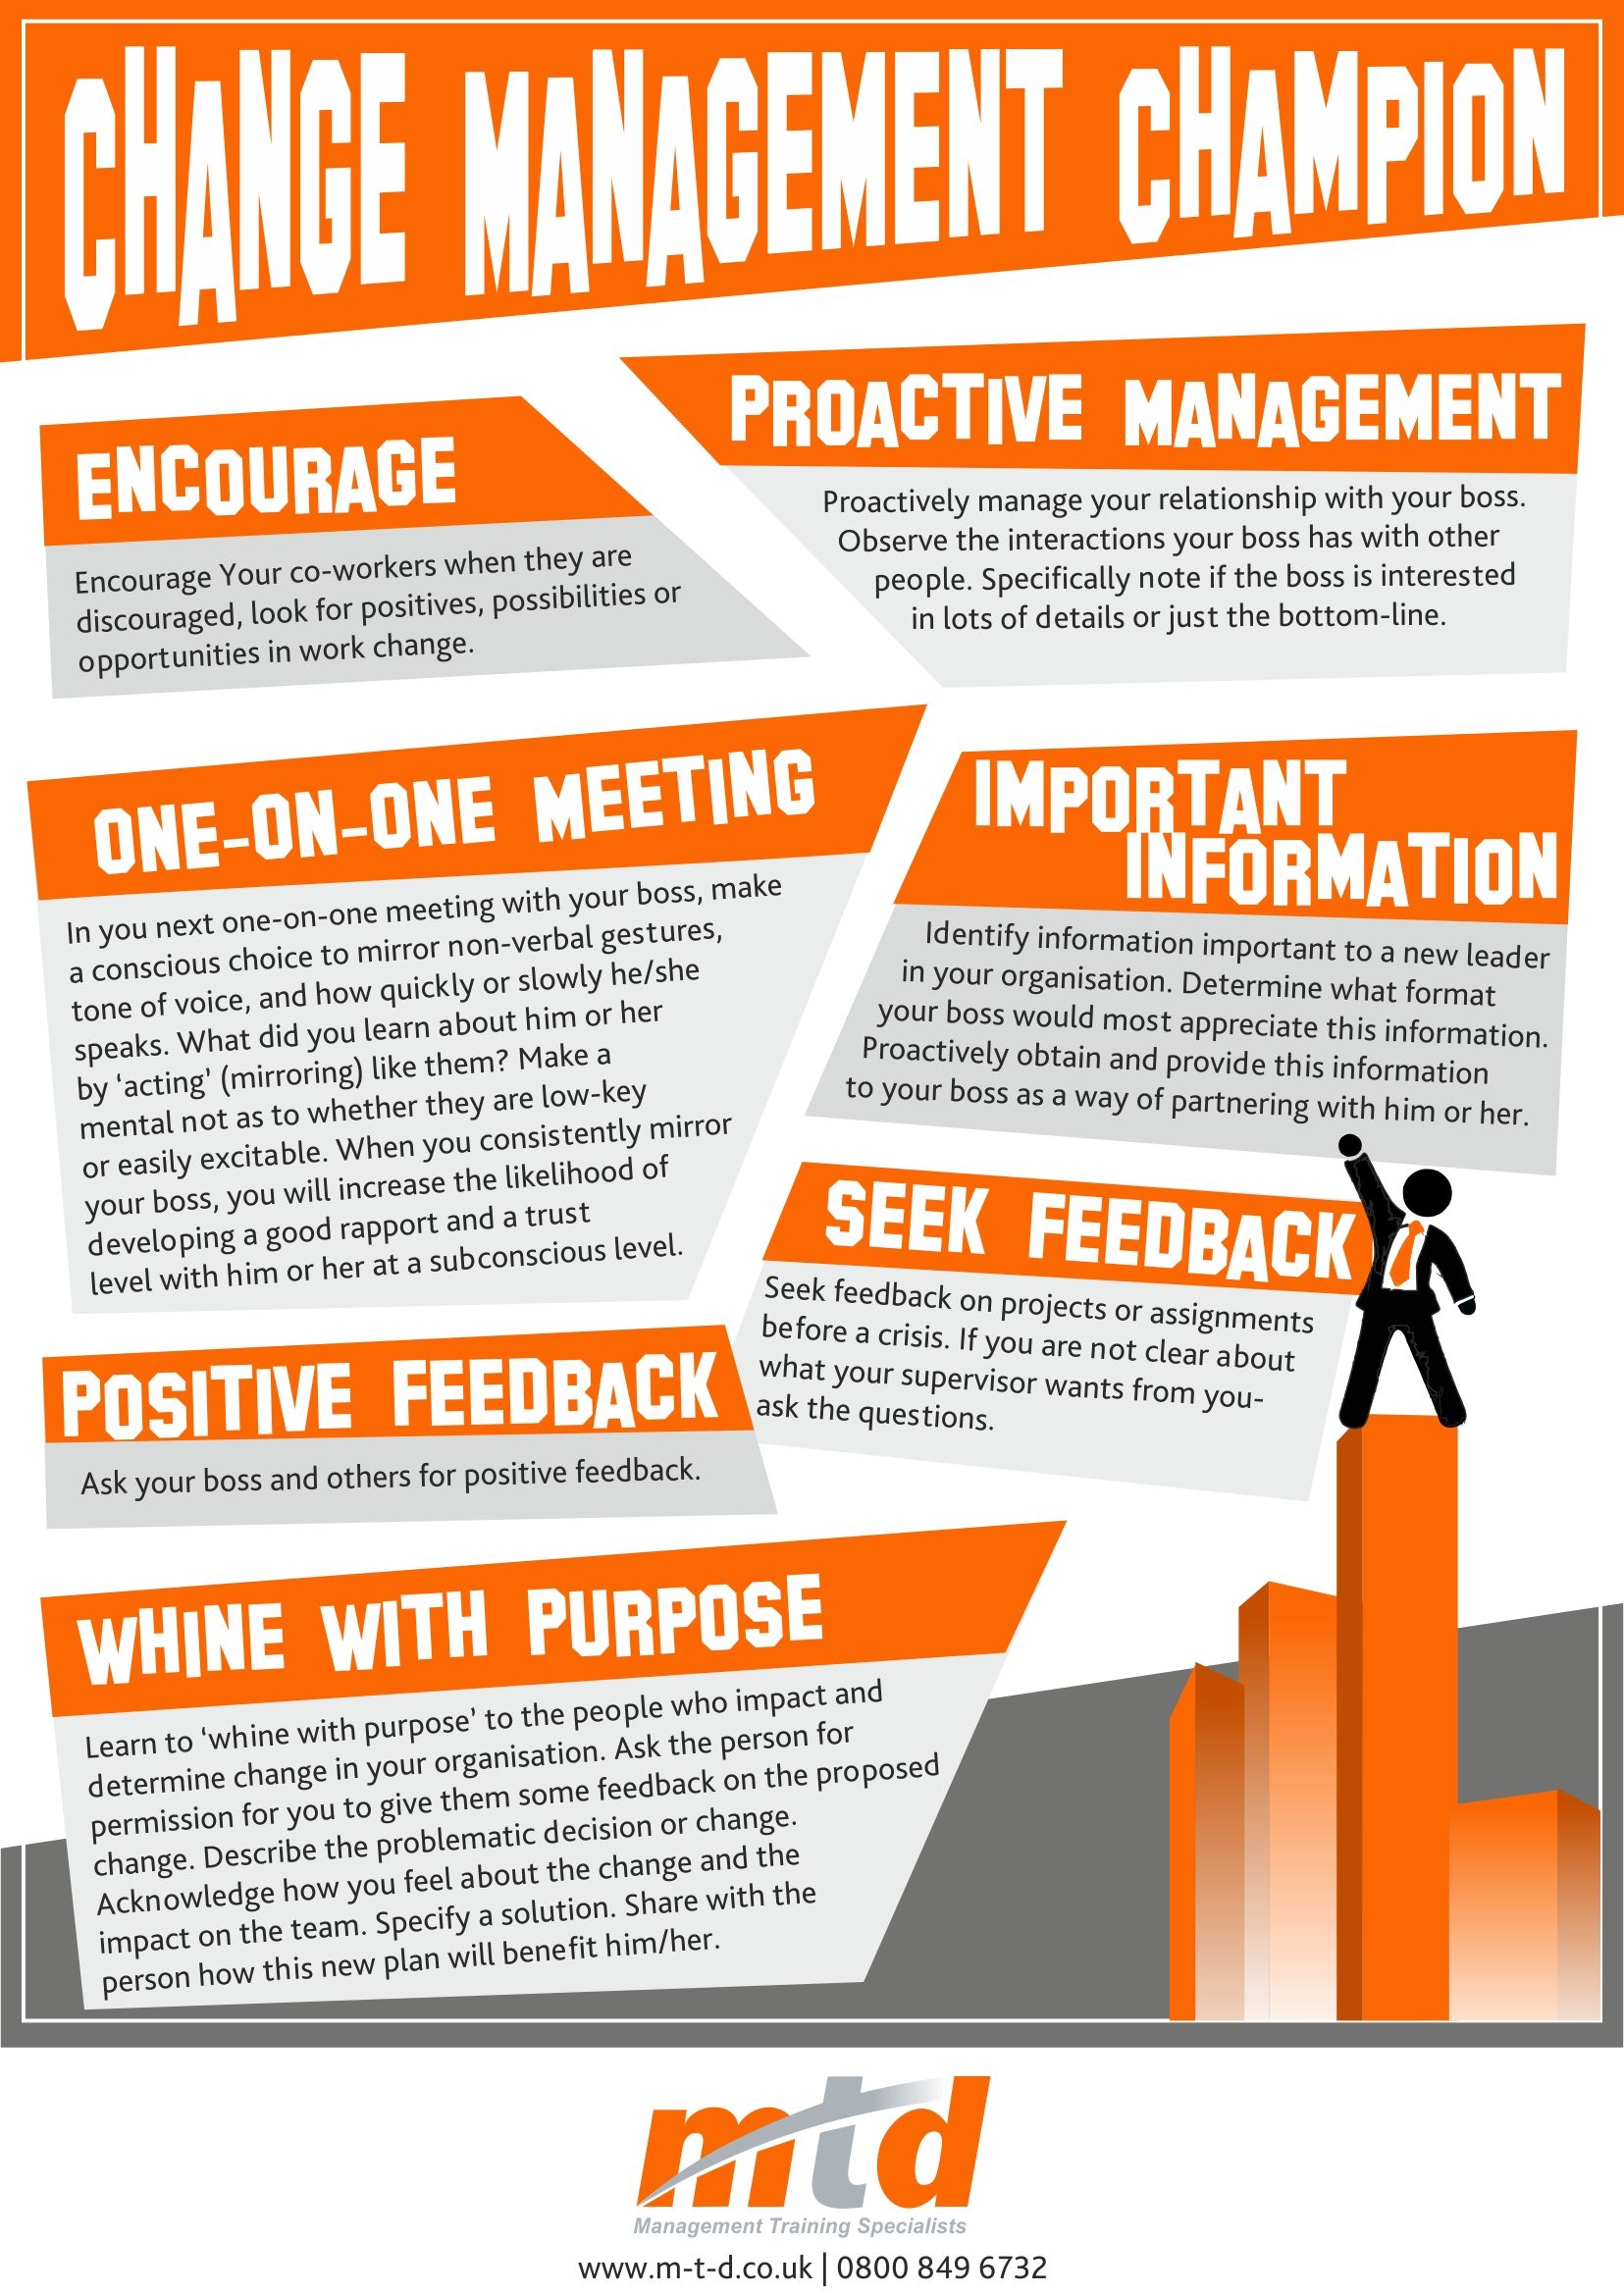 Change Management Videos and Infographics - Change Management Tools